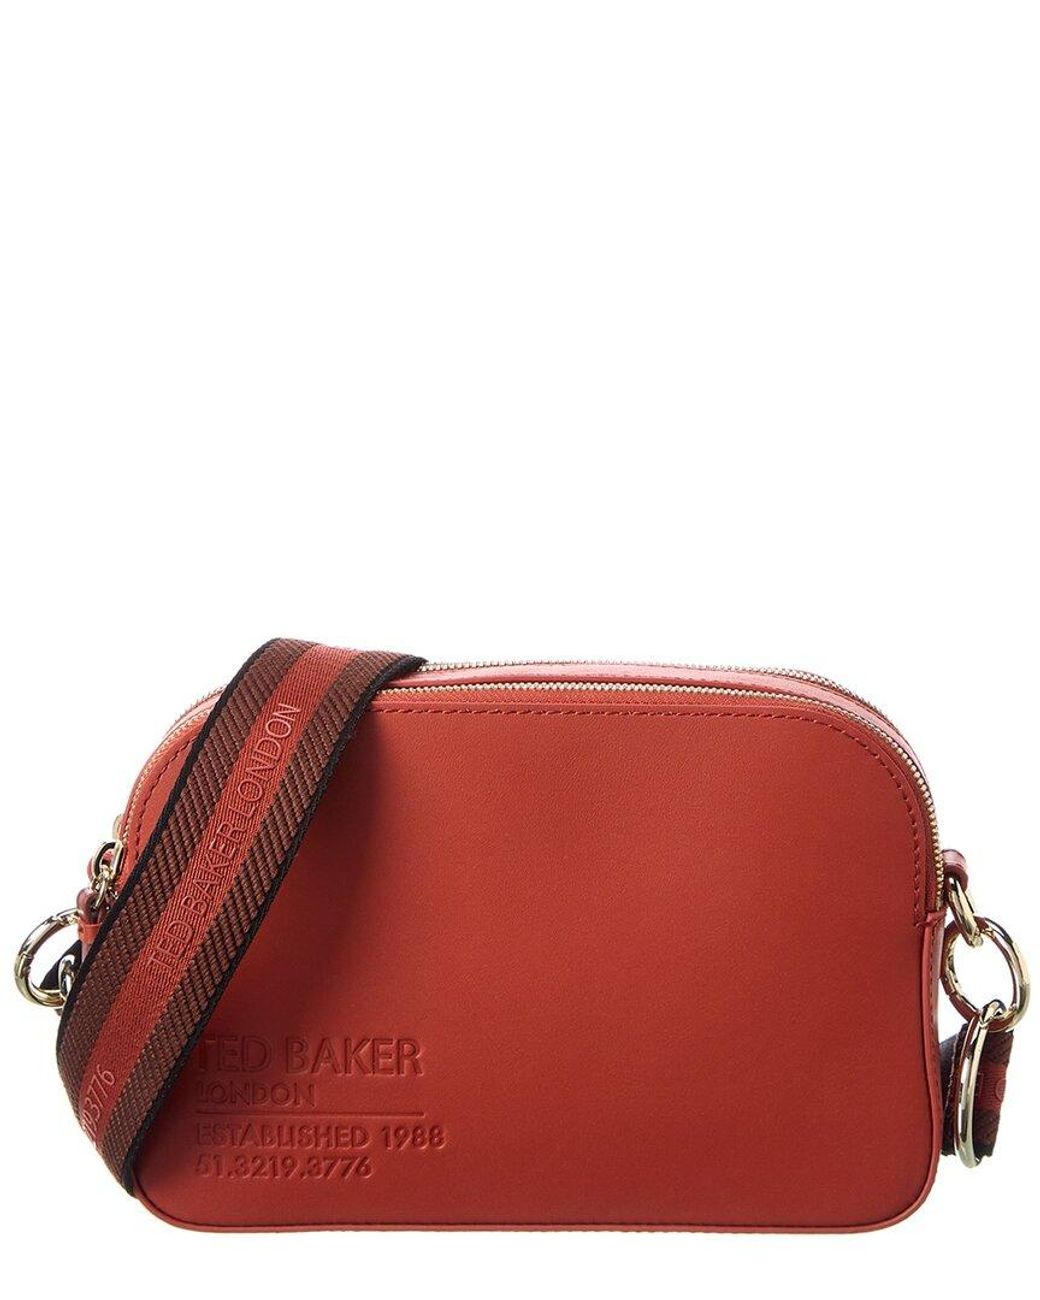 Ted Baker Bags - Amali Red - Buy Online at Pettits, est 1860